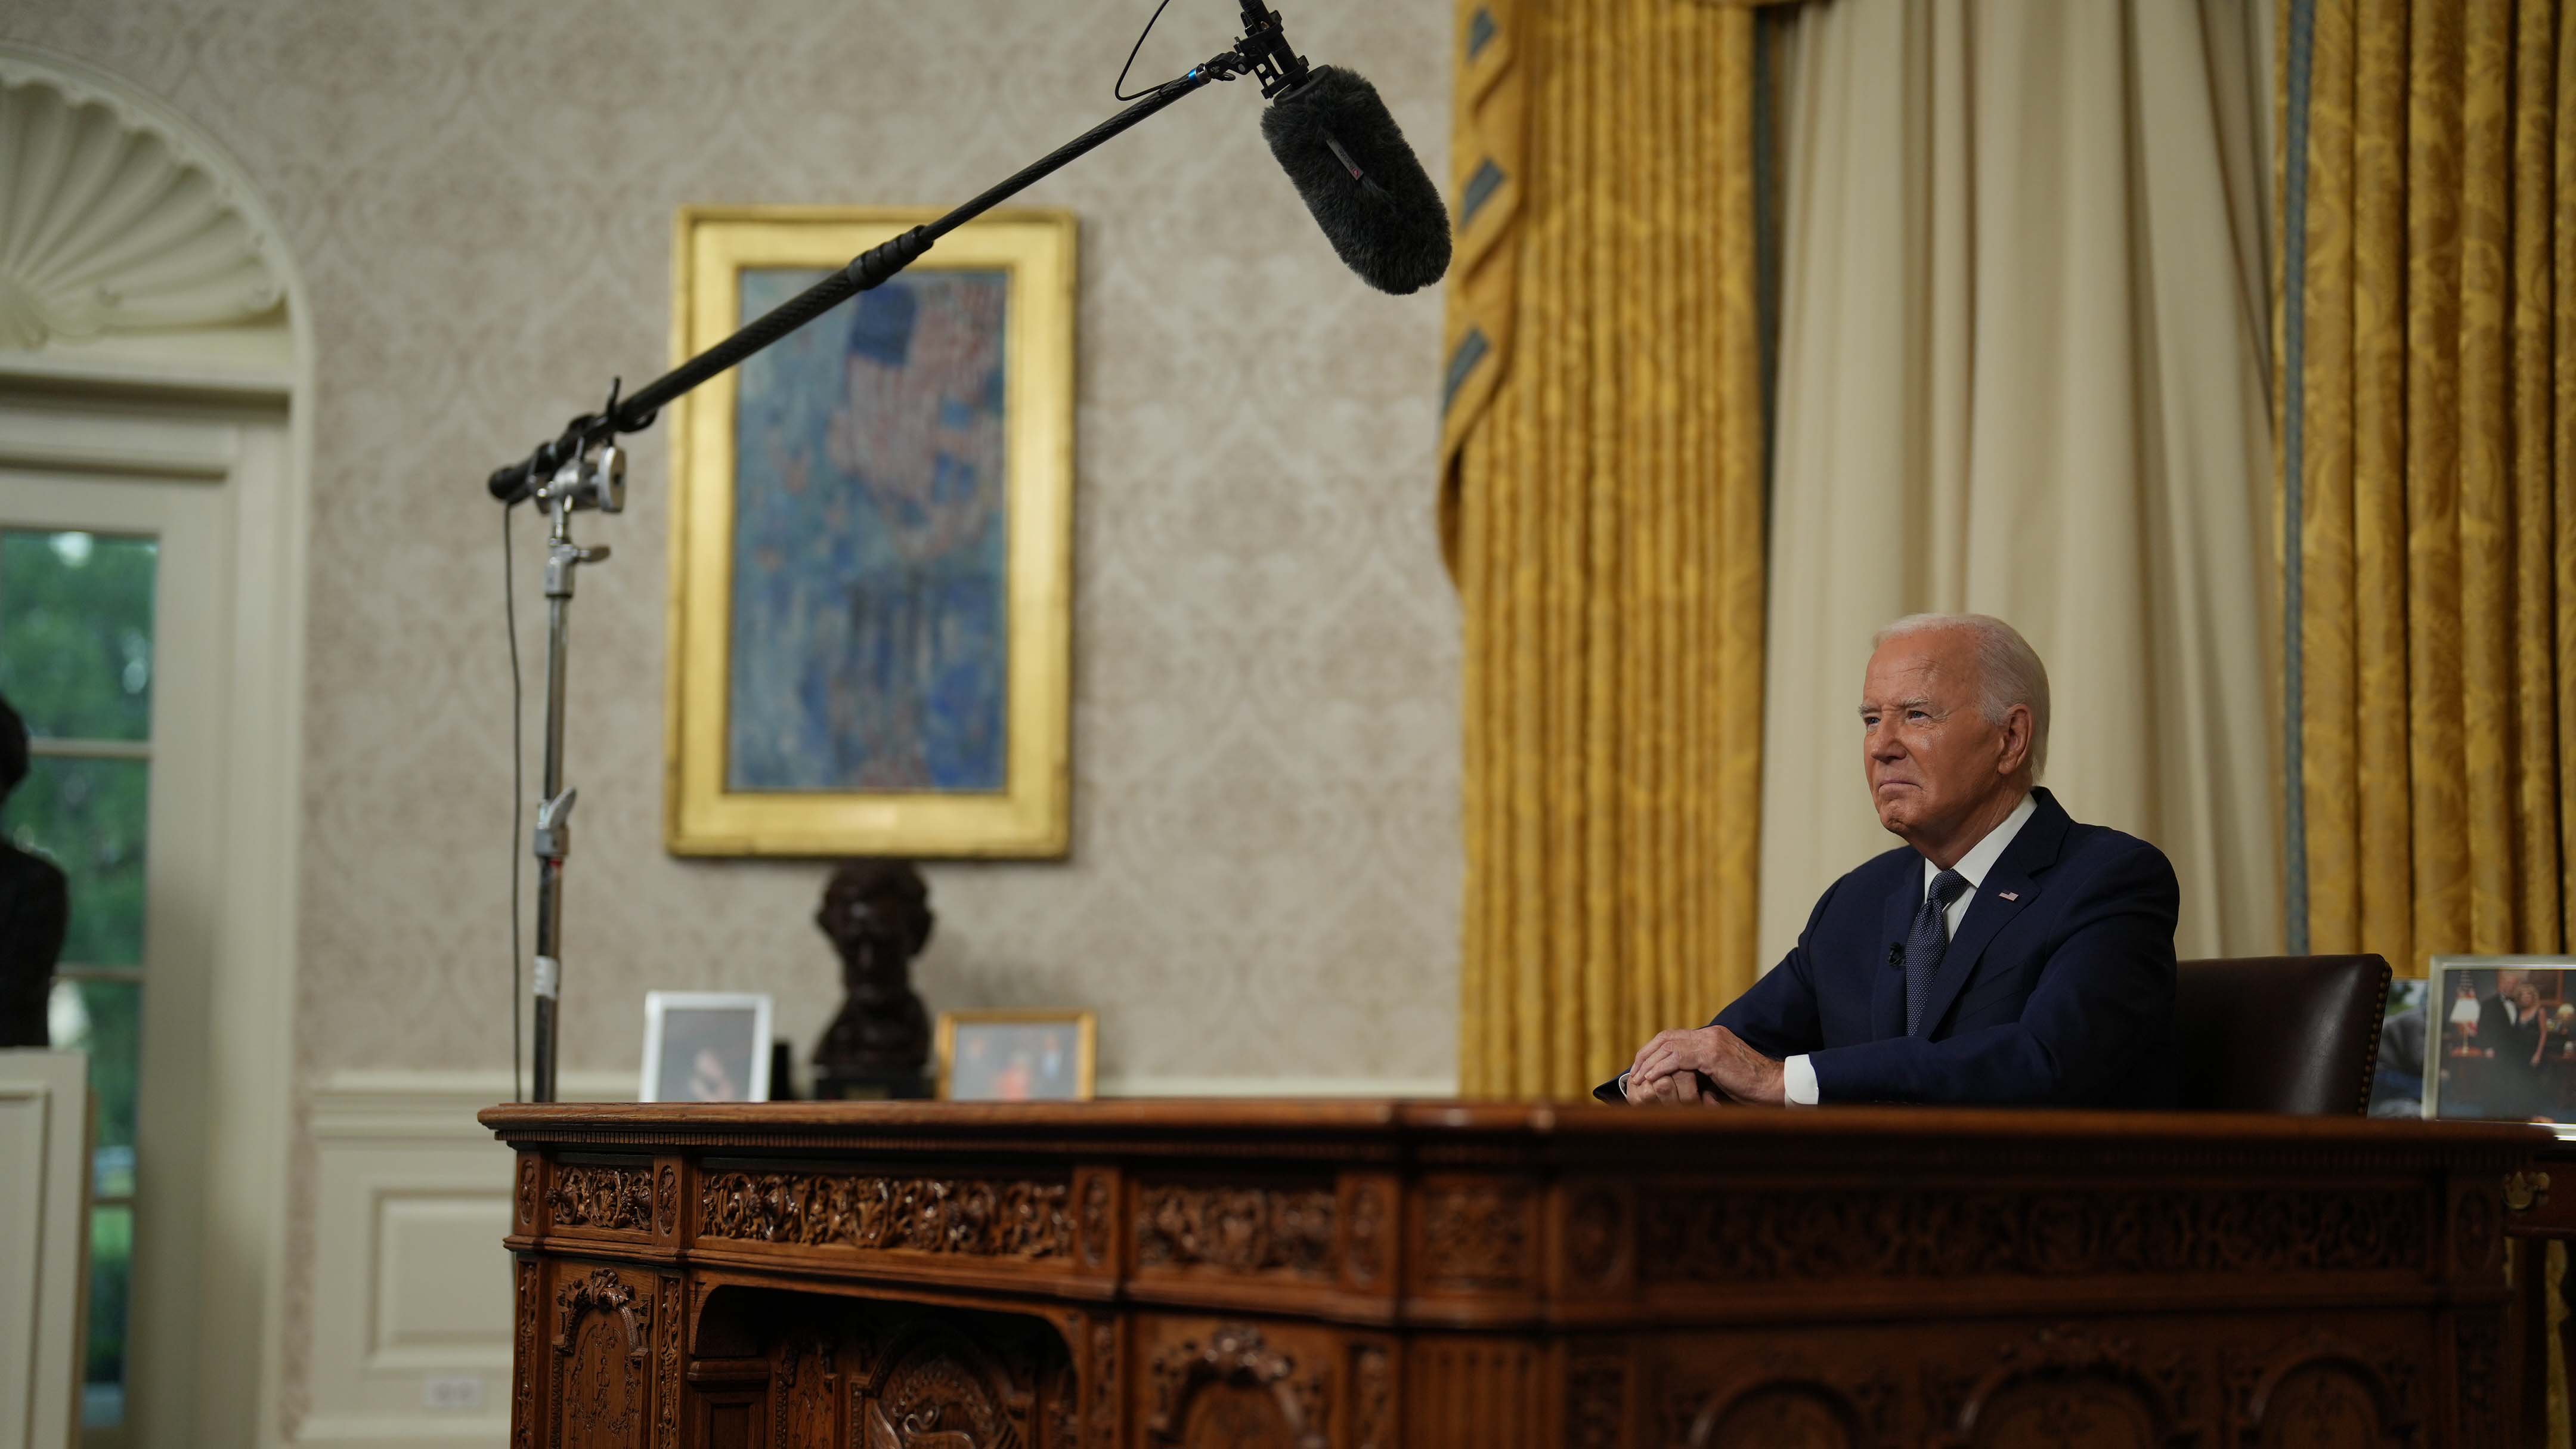 Joe Biden to give White House address on his decision to exit the race